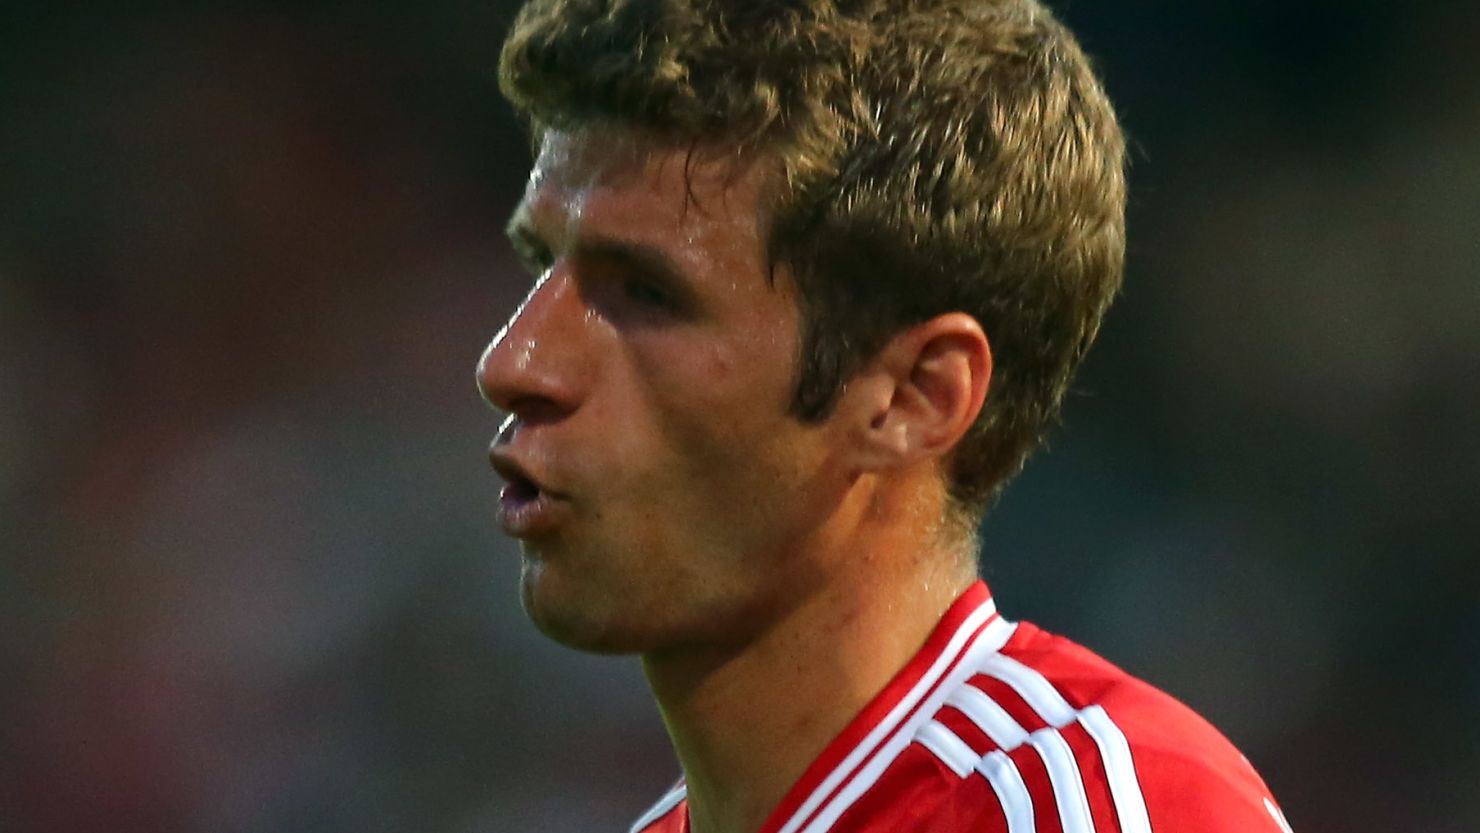 Thomas Muller after scoring his second goal in Bayern Munich's German Cup win.